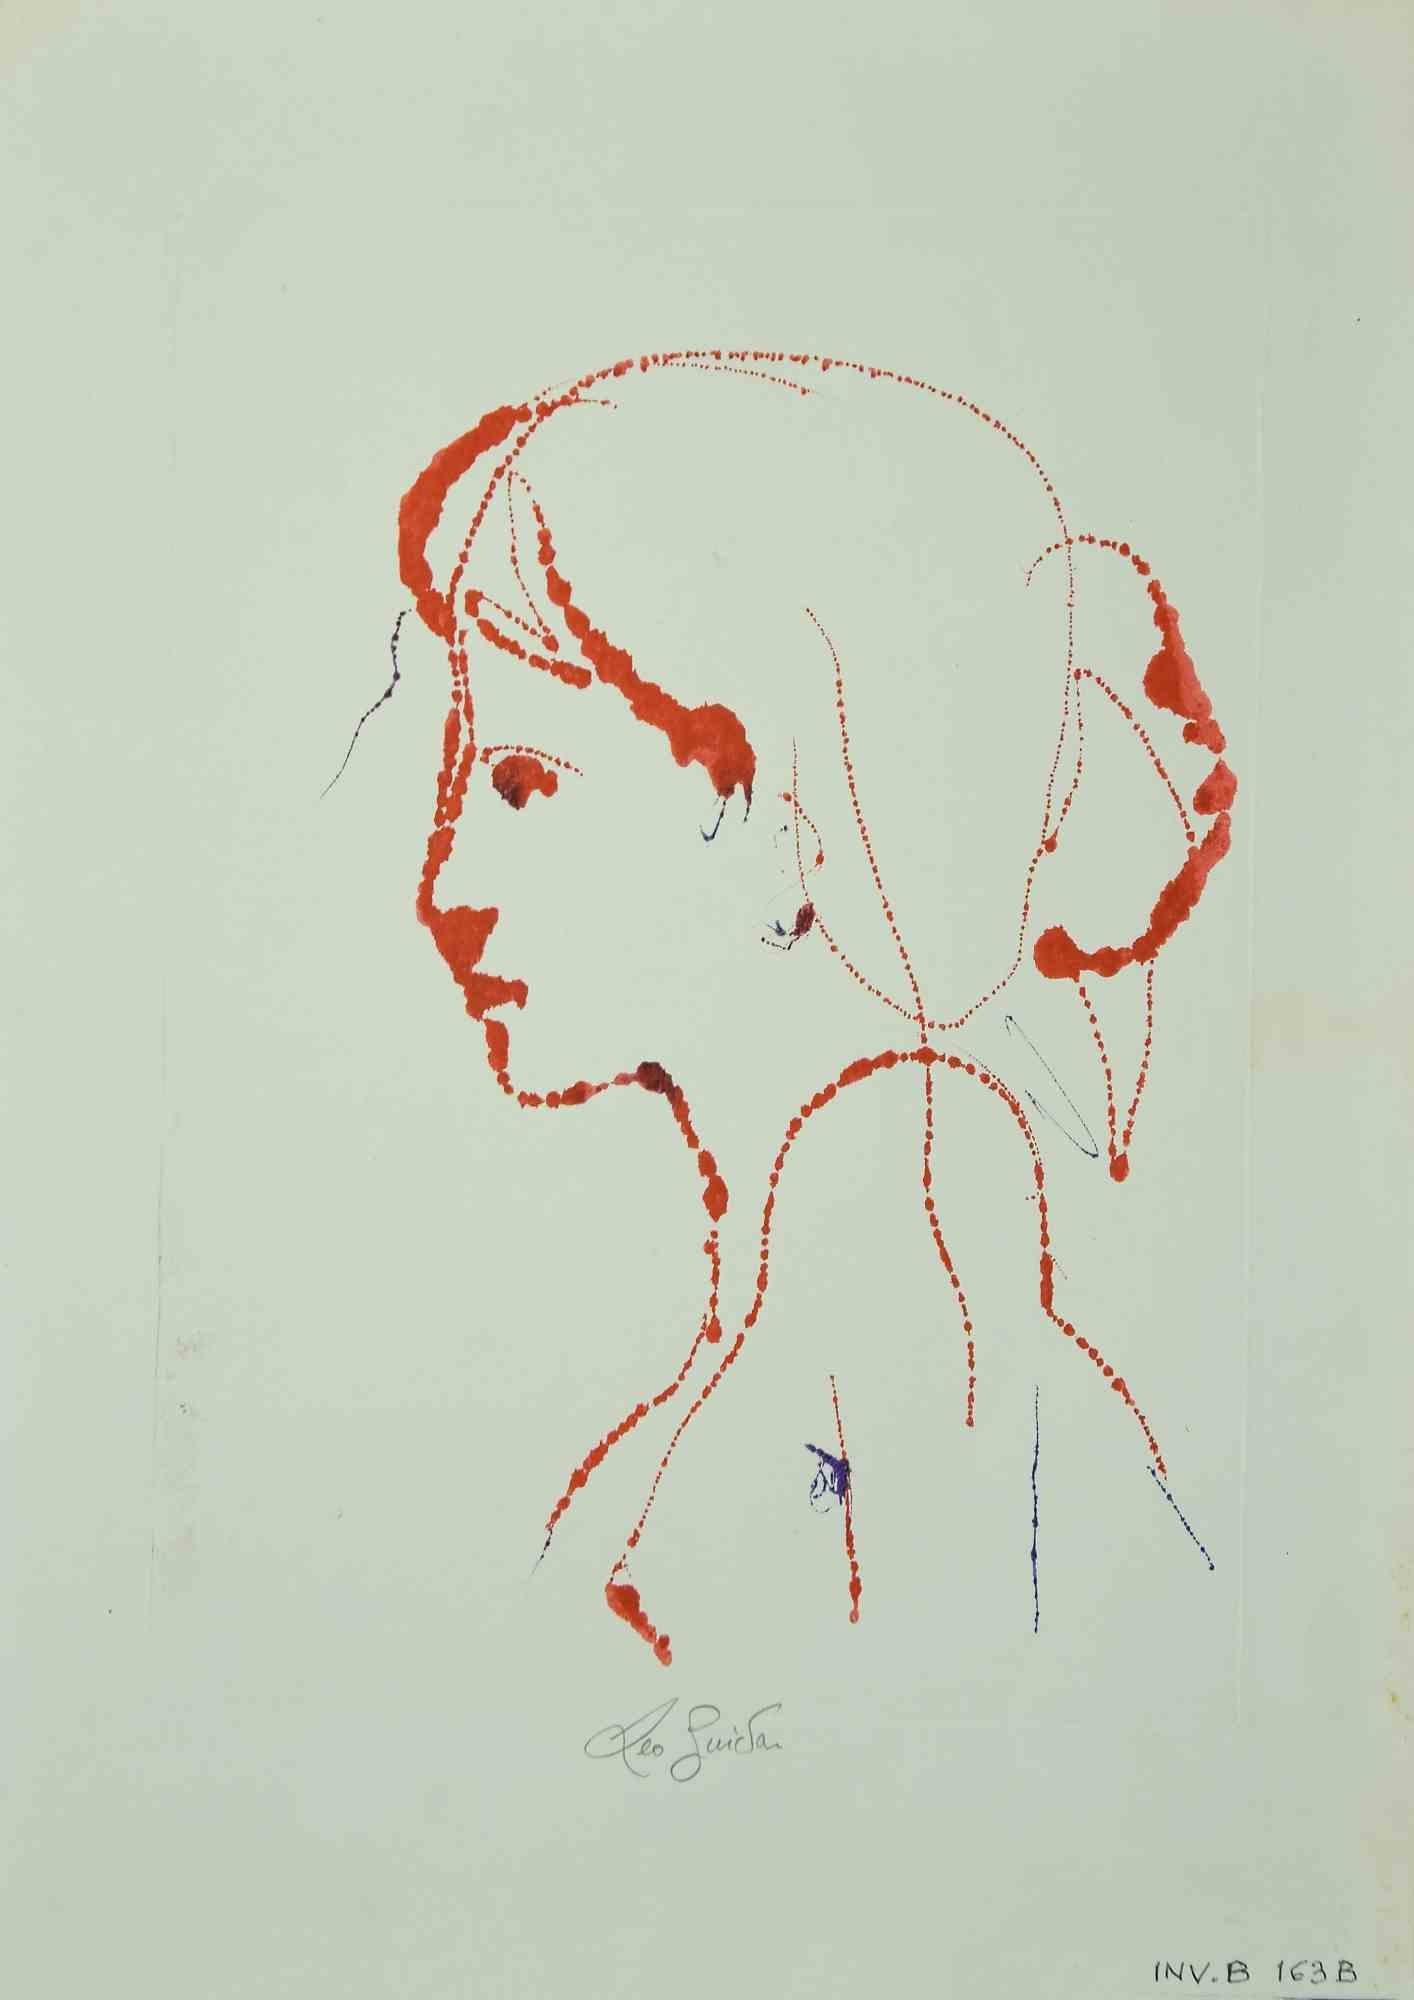 Portrait is an original artwork realized  in 1970 by the italian Contemporary artist  Leo Guida  (1992 - 2017).

Original watercolor drawing on ivory-colored paper.

Hand-signed on the lower margins. 

Excellent conditions. INV.B 163B

This artwork